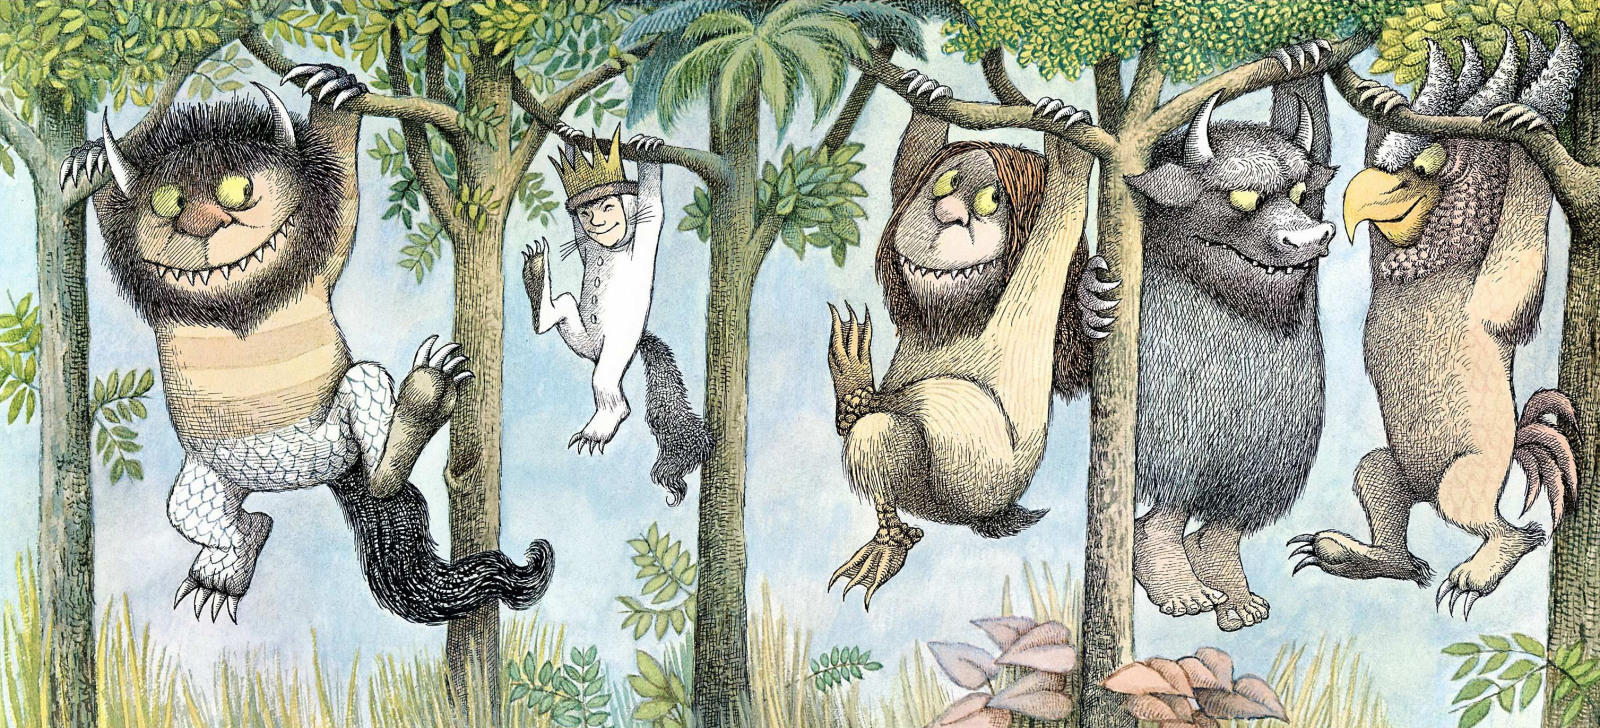 Where The Wild Things Are #9